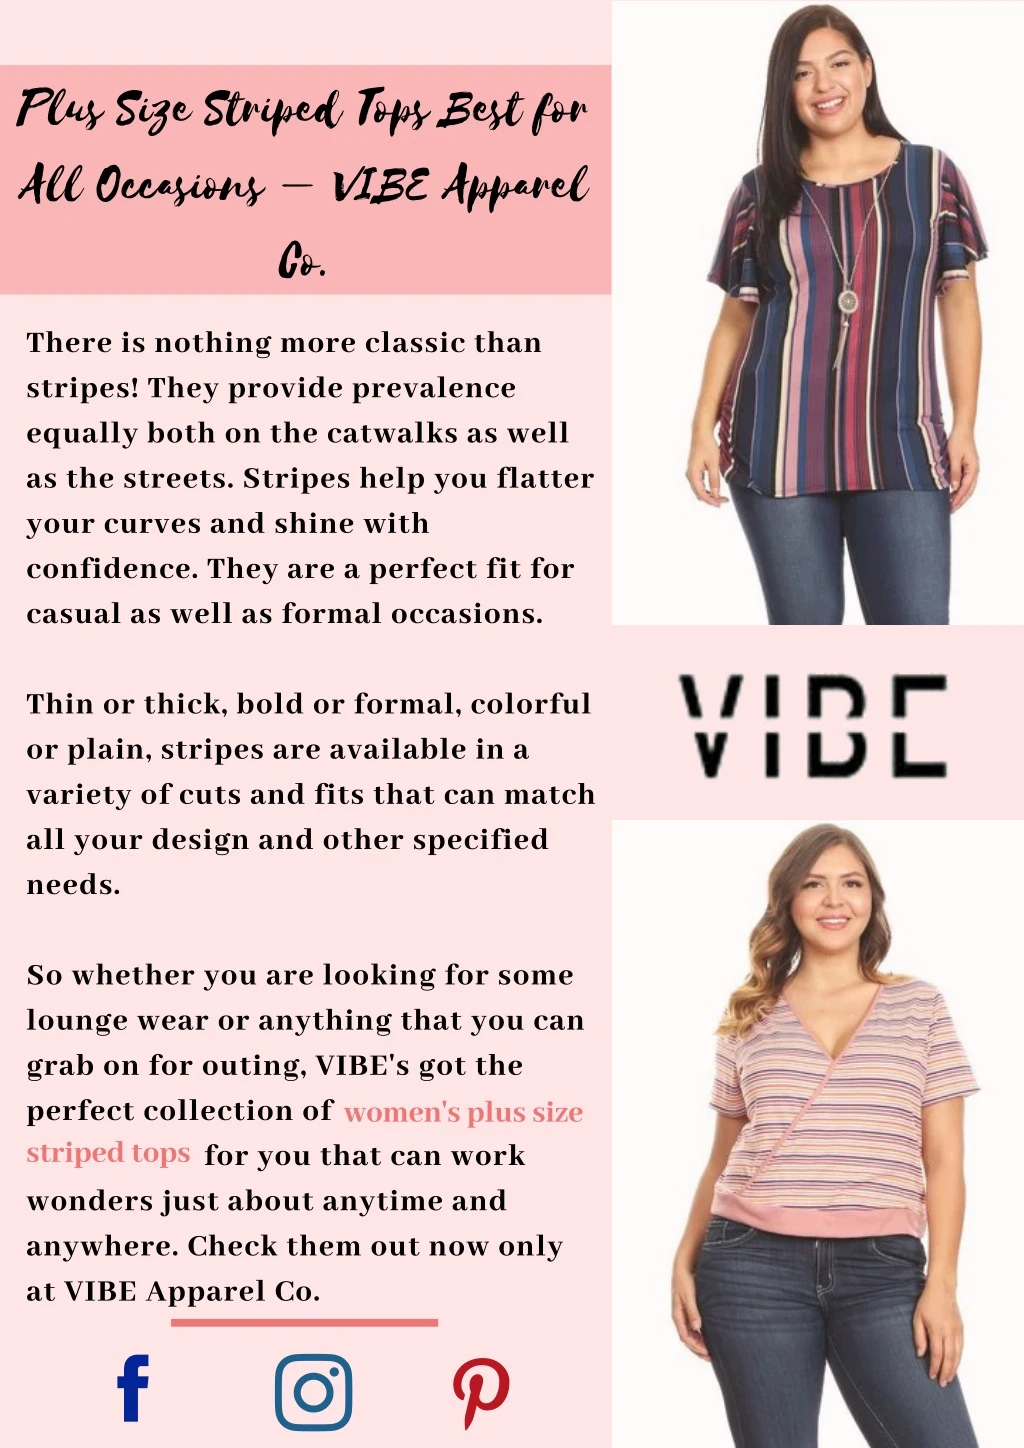 plus size striped tops best for all occasions